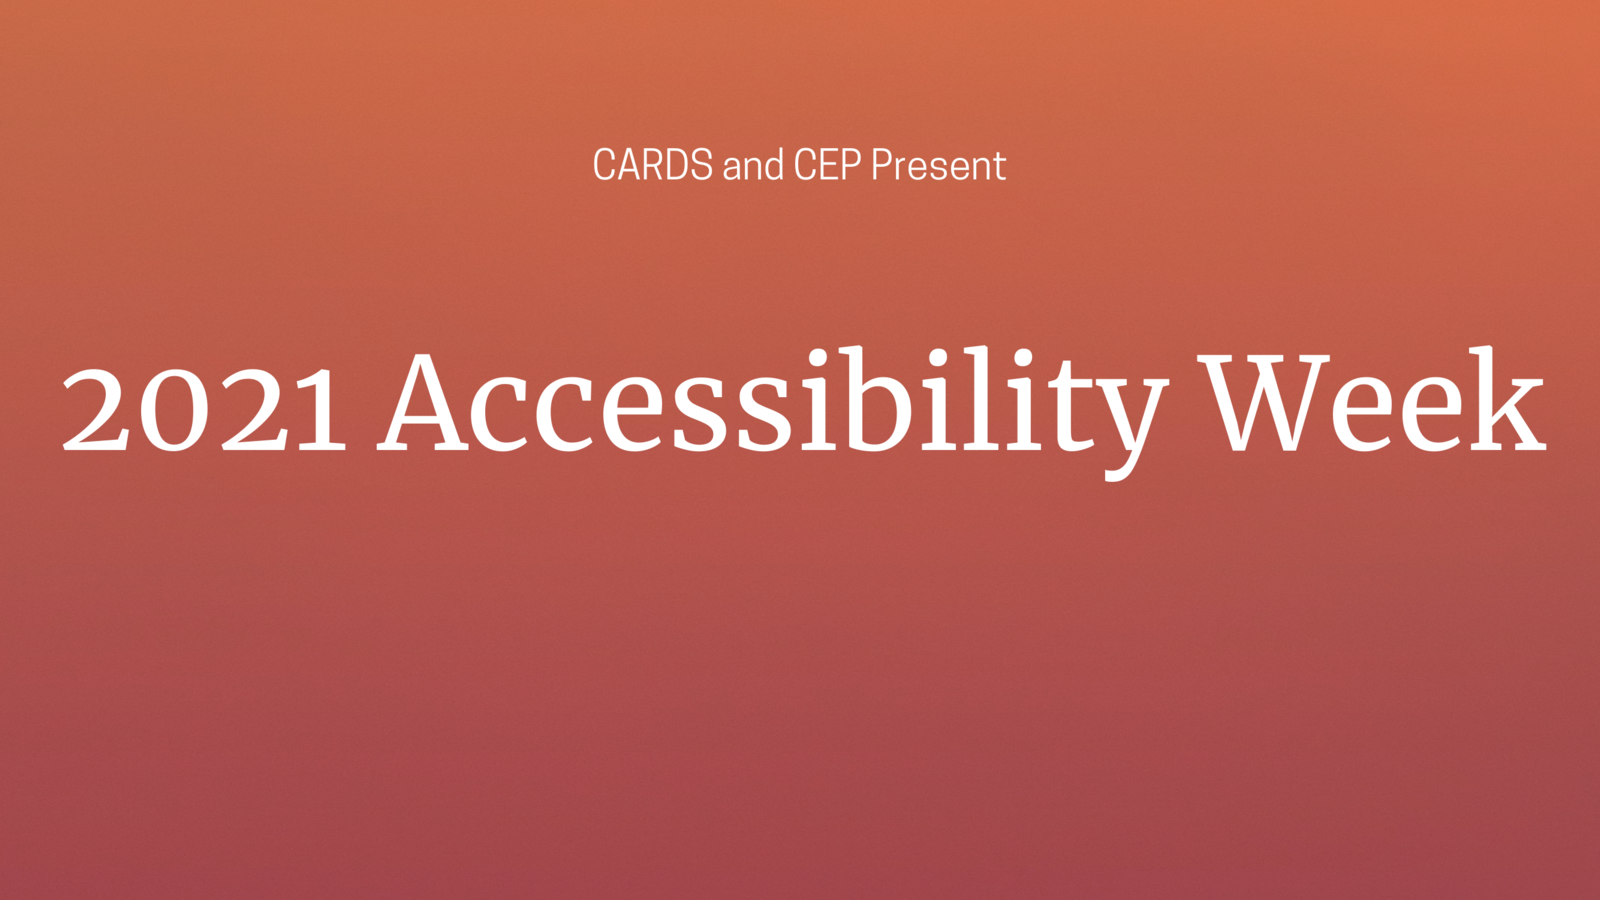 CARDS & CEP Present Accessibility Week 2021